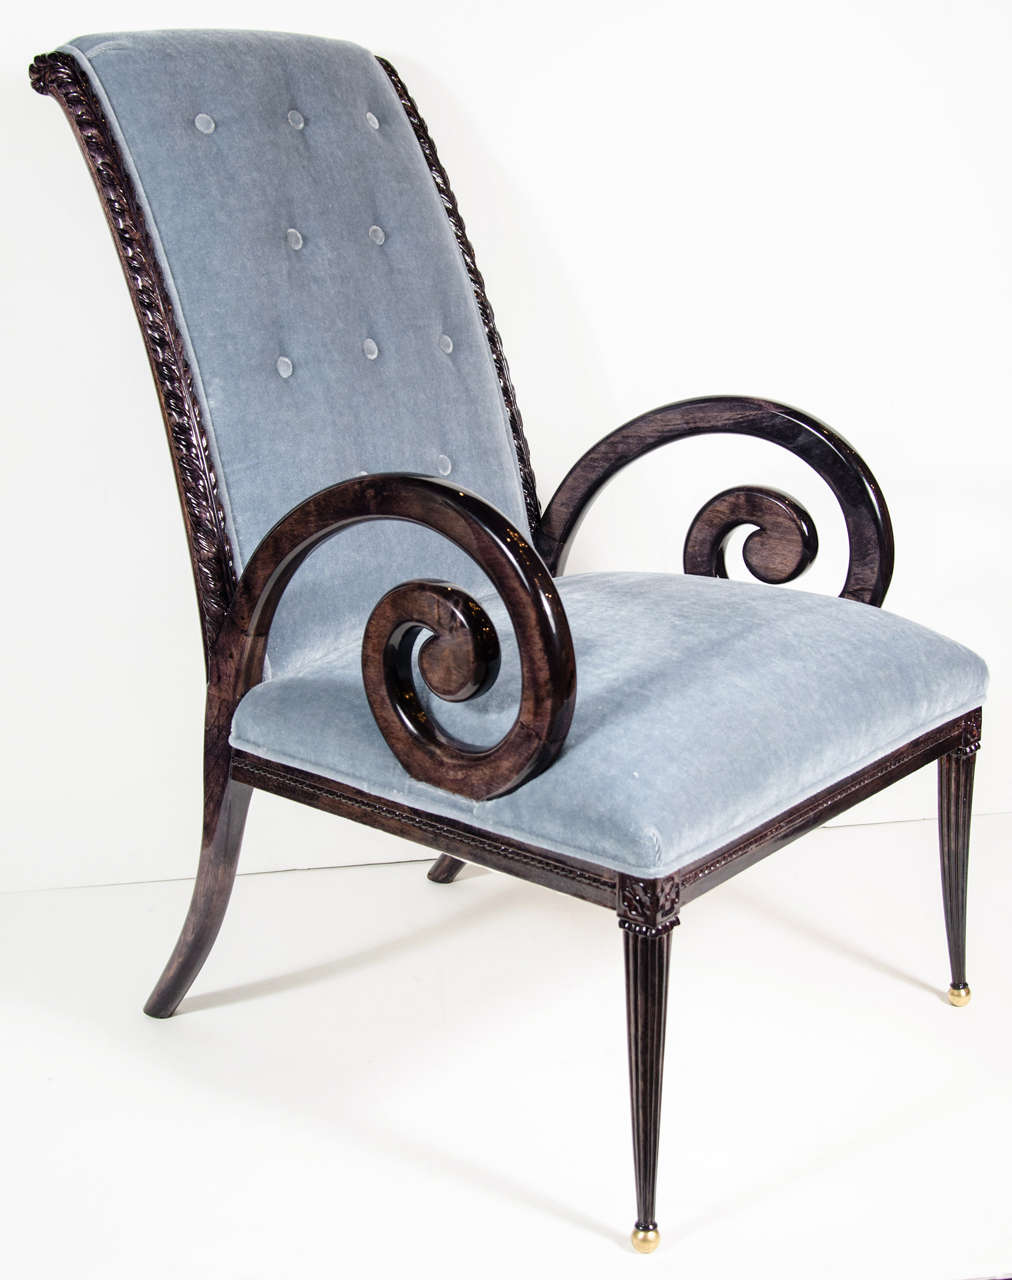 This stunning chair features a spiral arm design and hand carved stylized plume detailing all in ebonized walnut with gilt tips on the feet. It also features button back detailing and has been newly upholstered in a Grey Blue mohair. Restored to